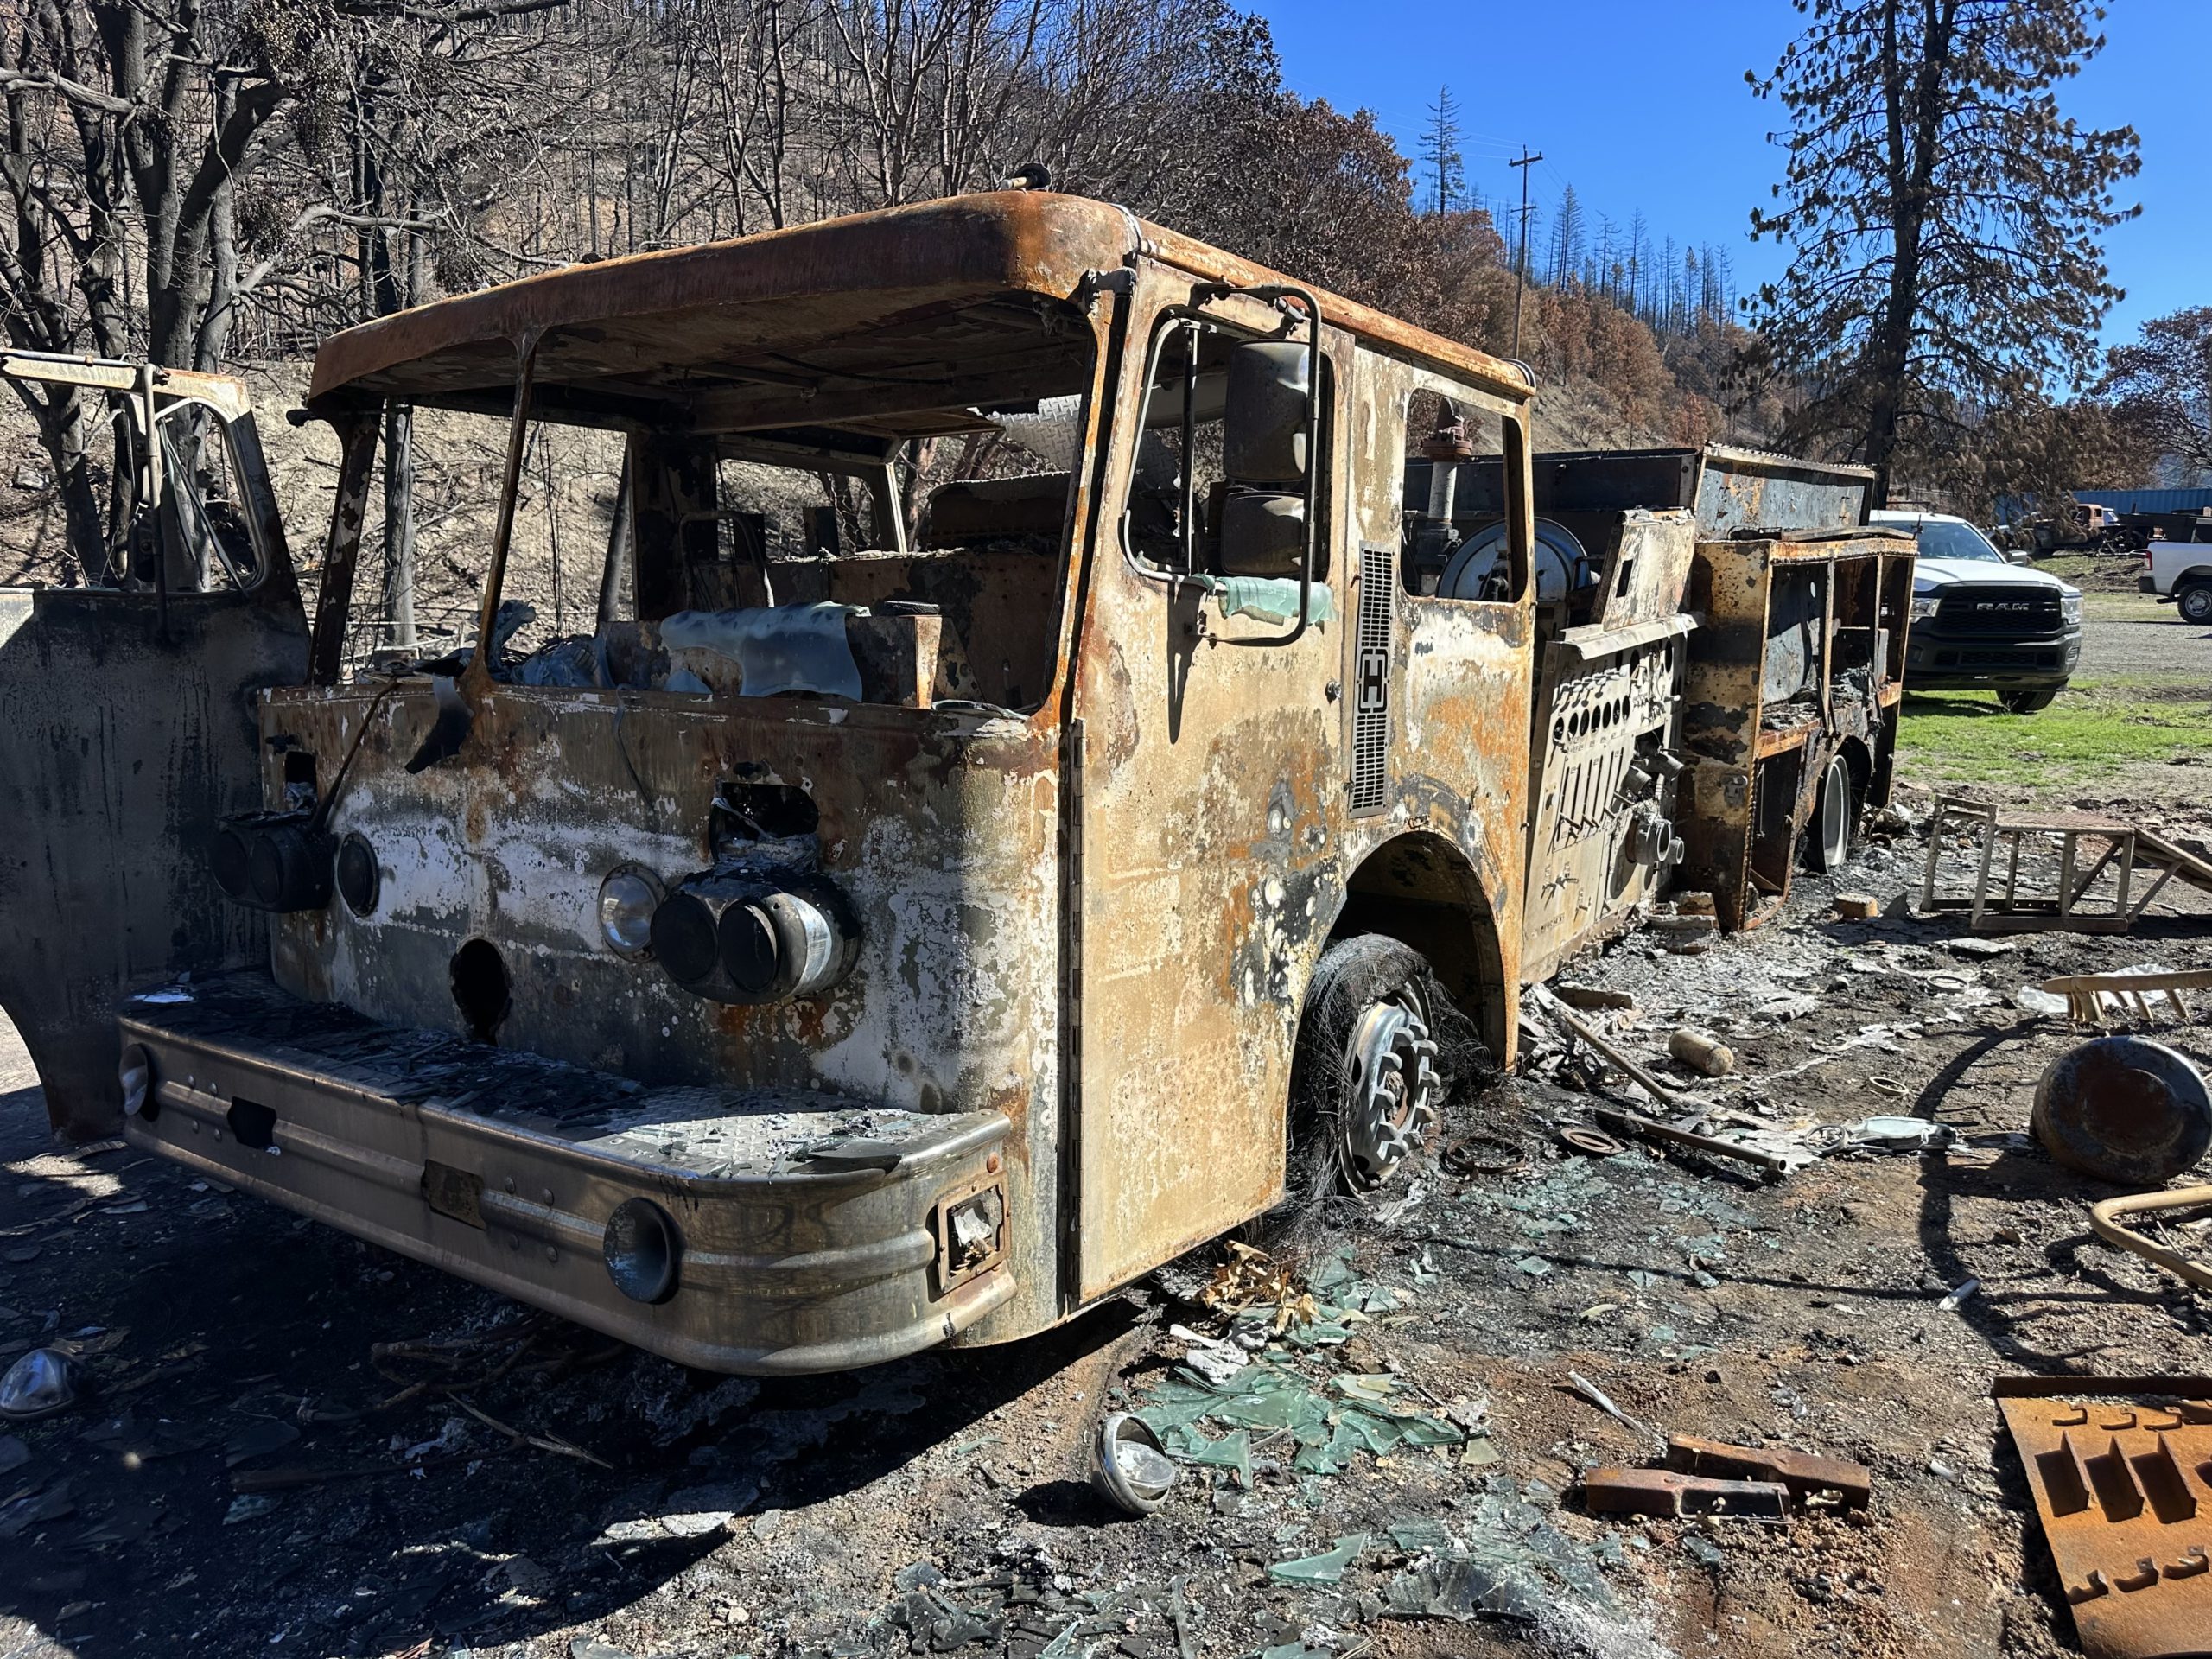 A burned bus sitting in the dirt.